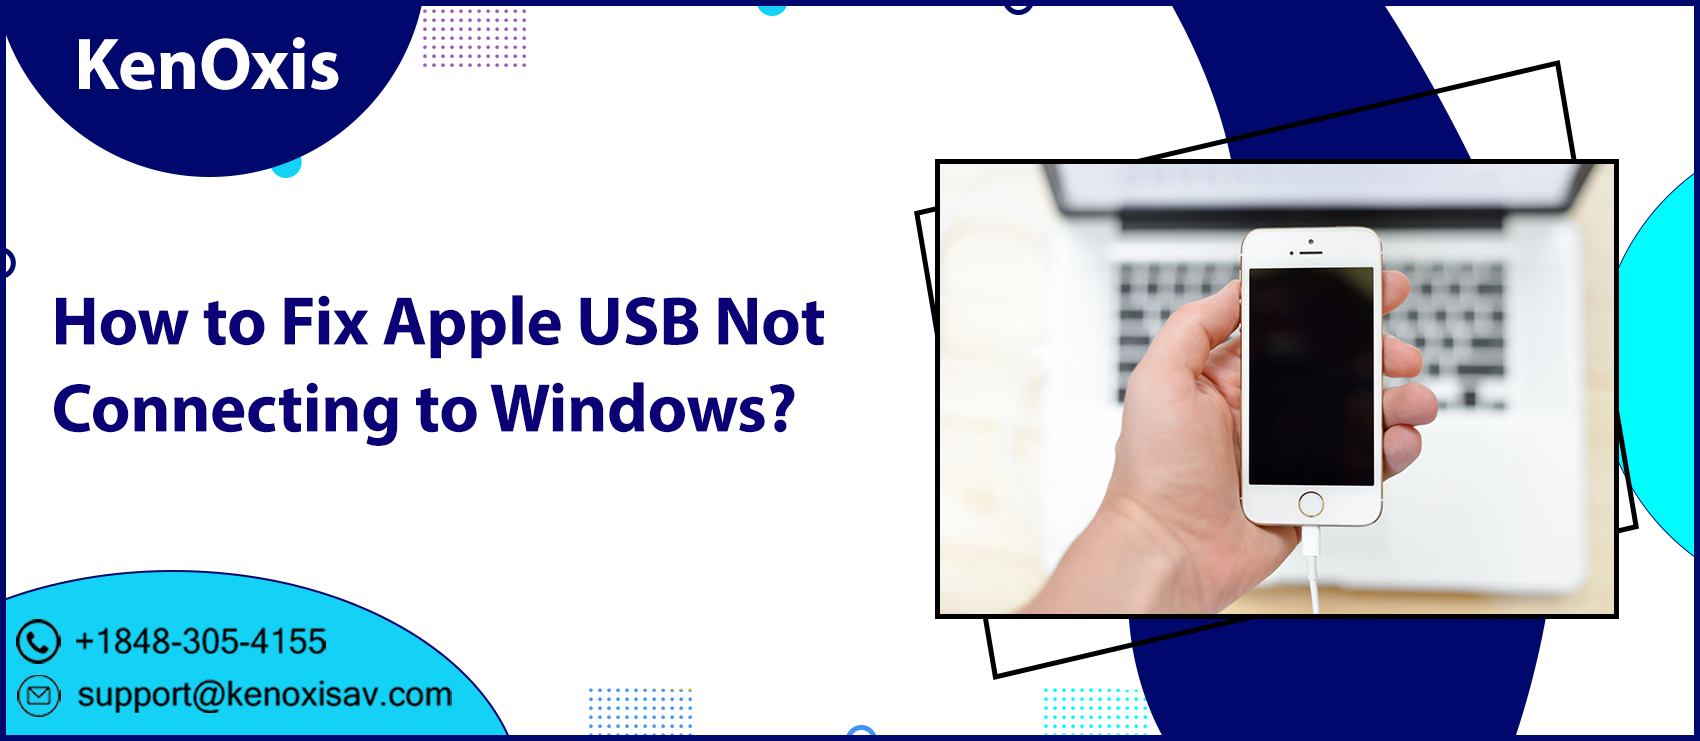 How to Fix Apple USB Not Connecting to Windows?